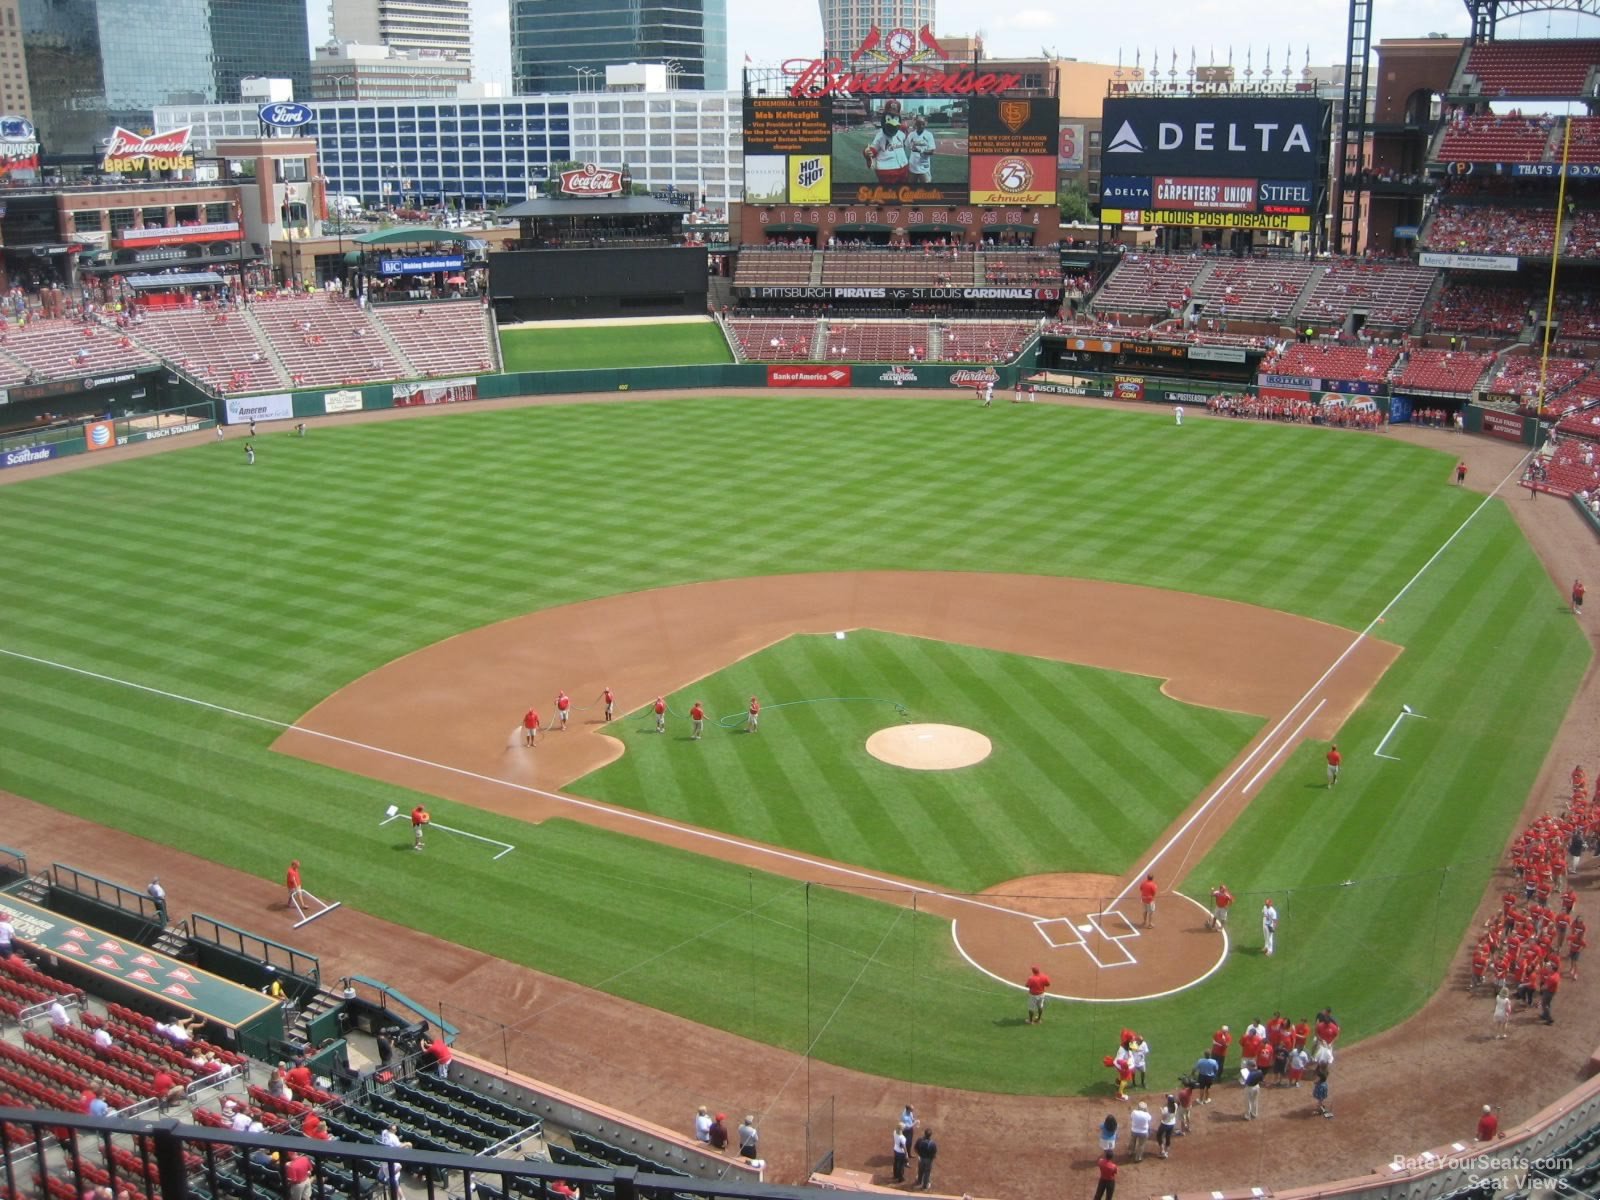 Section 352 at Busch Stadium - RateYourSeats.com